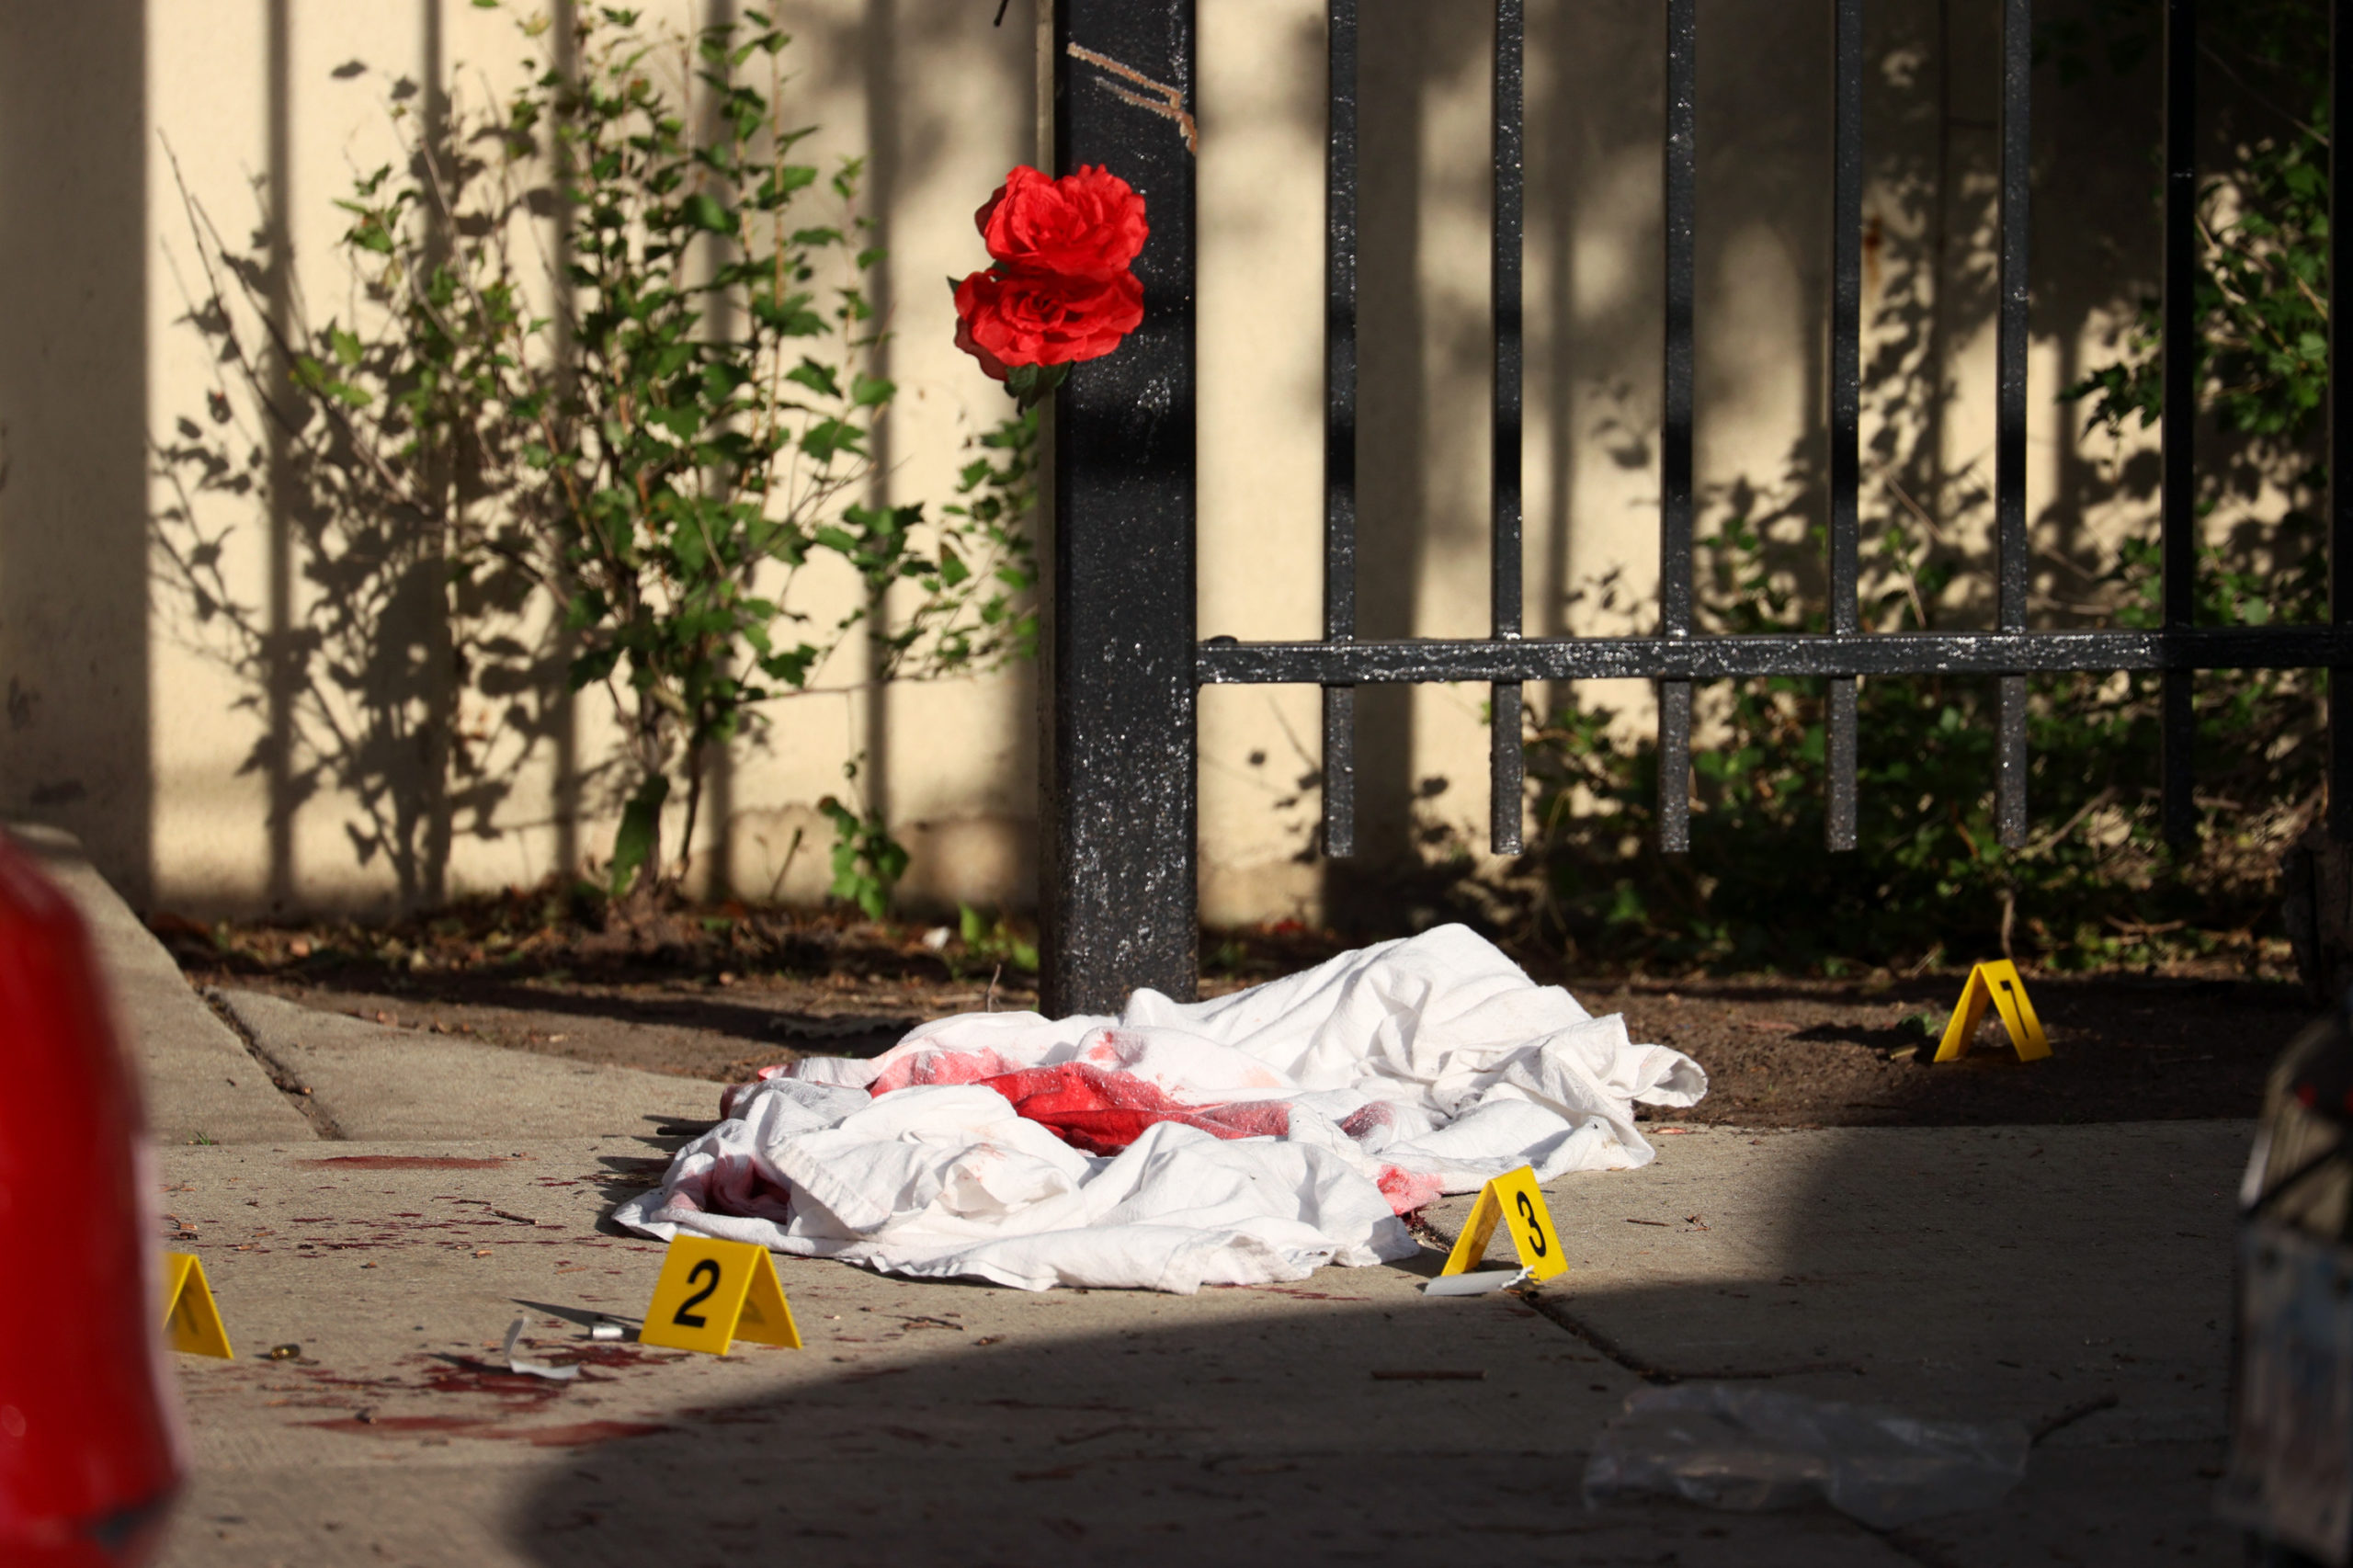 A blood-soaked sheet sits among evidence markers following a mass shooting on June 23 in Chicago, Illinois. (Scott Olson/Getty Images)